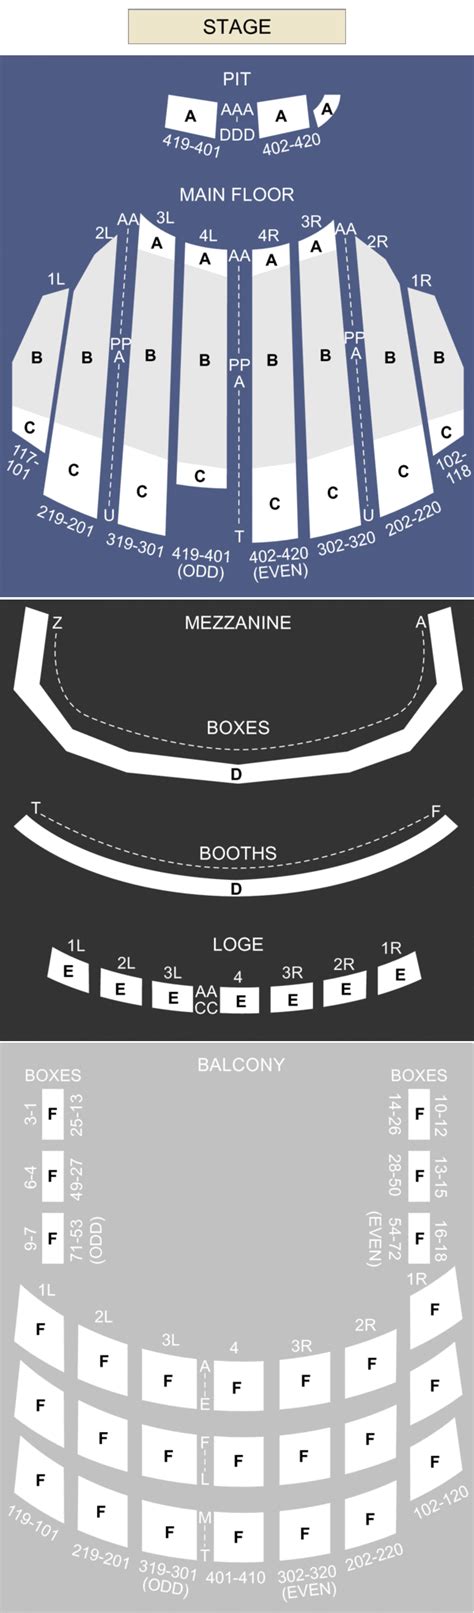 The Chicago Theatre Chicago Il Seating Chart And Stage Chicago